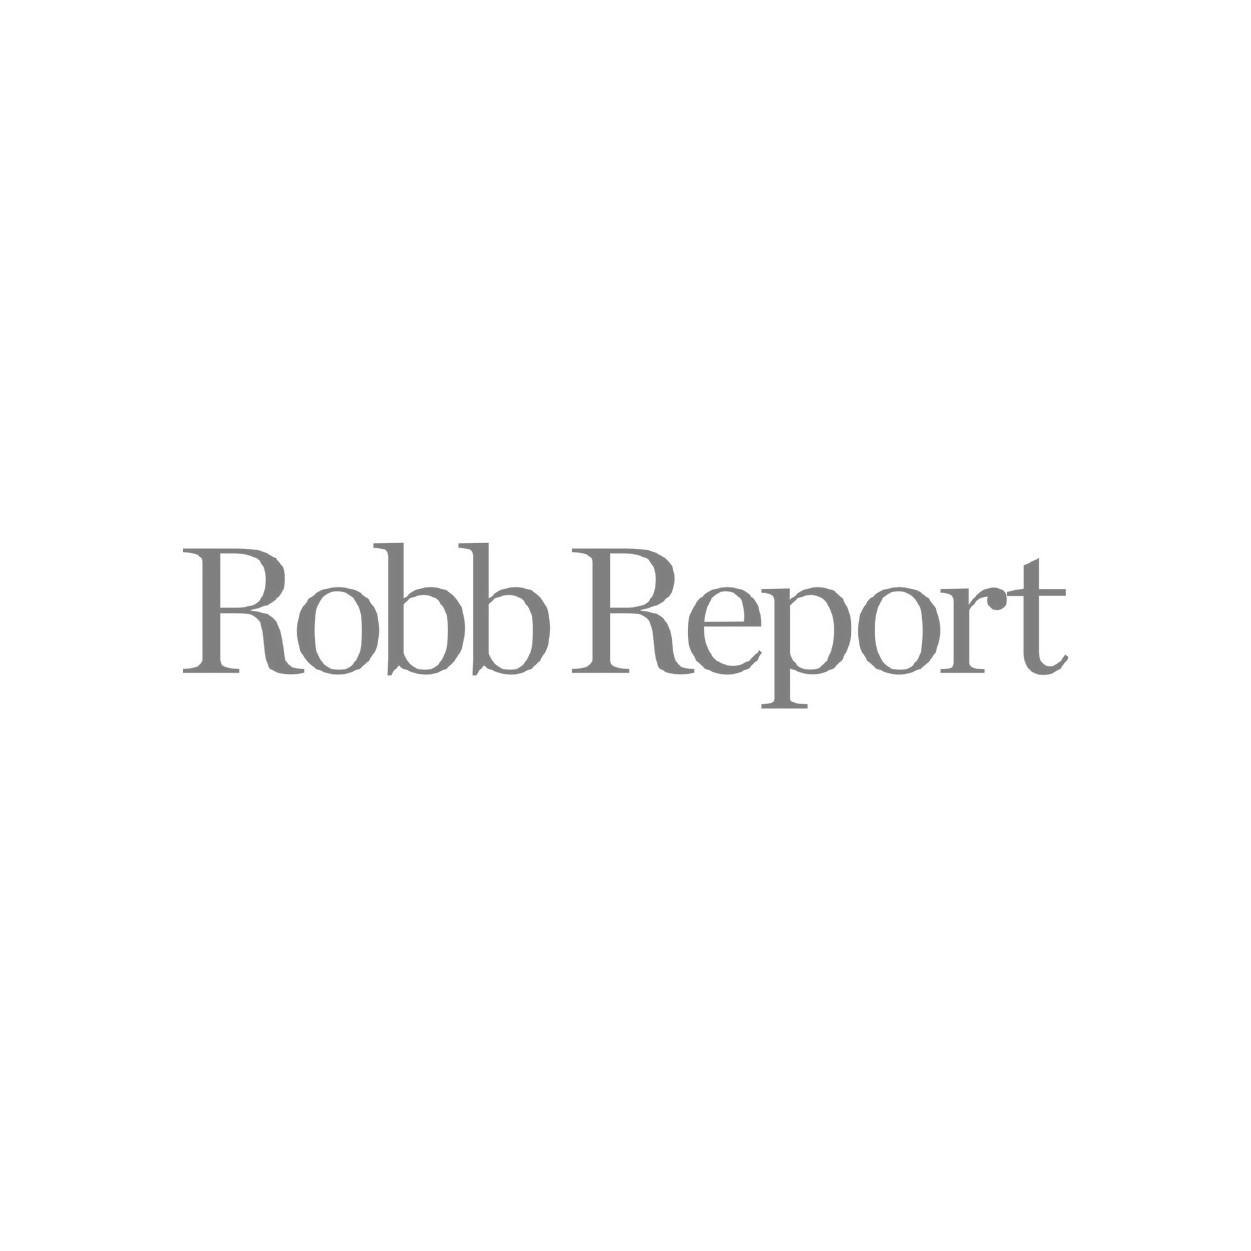 featured_in_robb_report.png